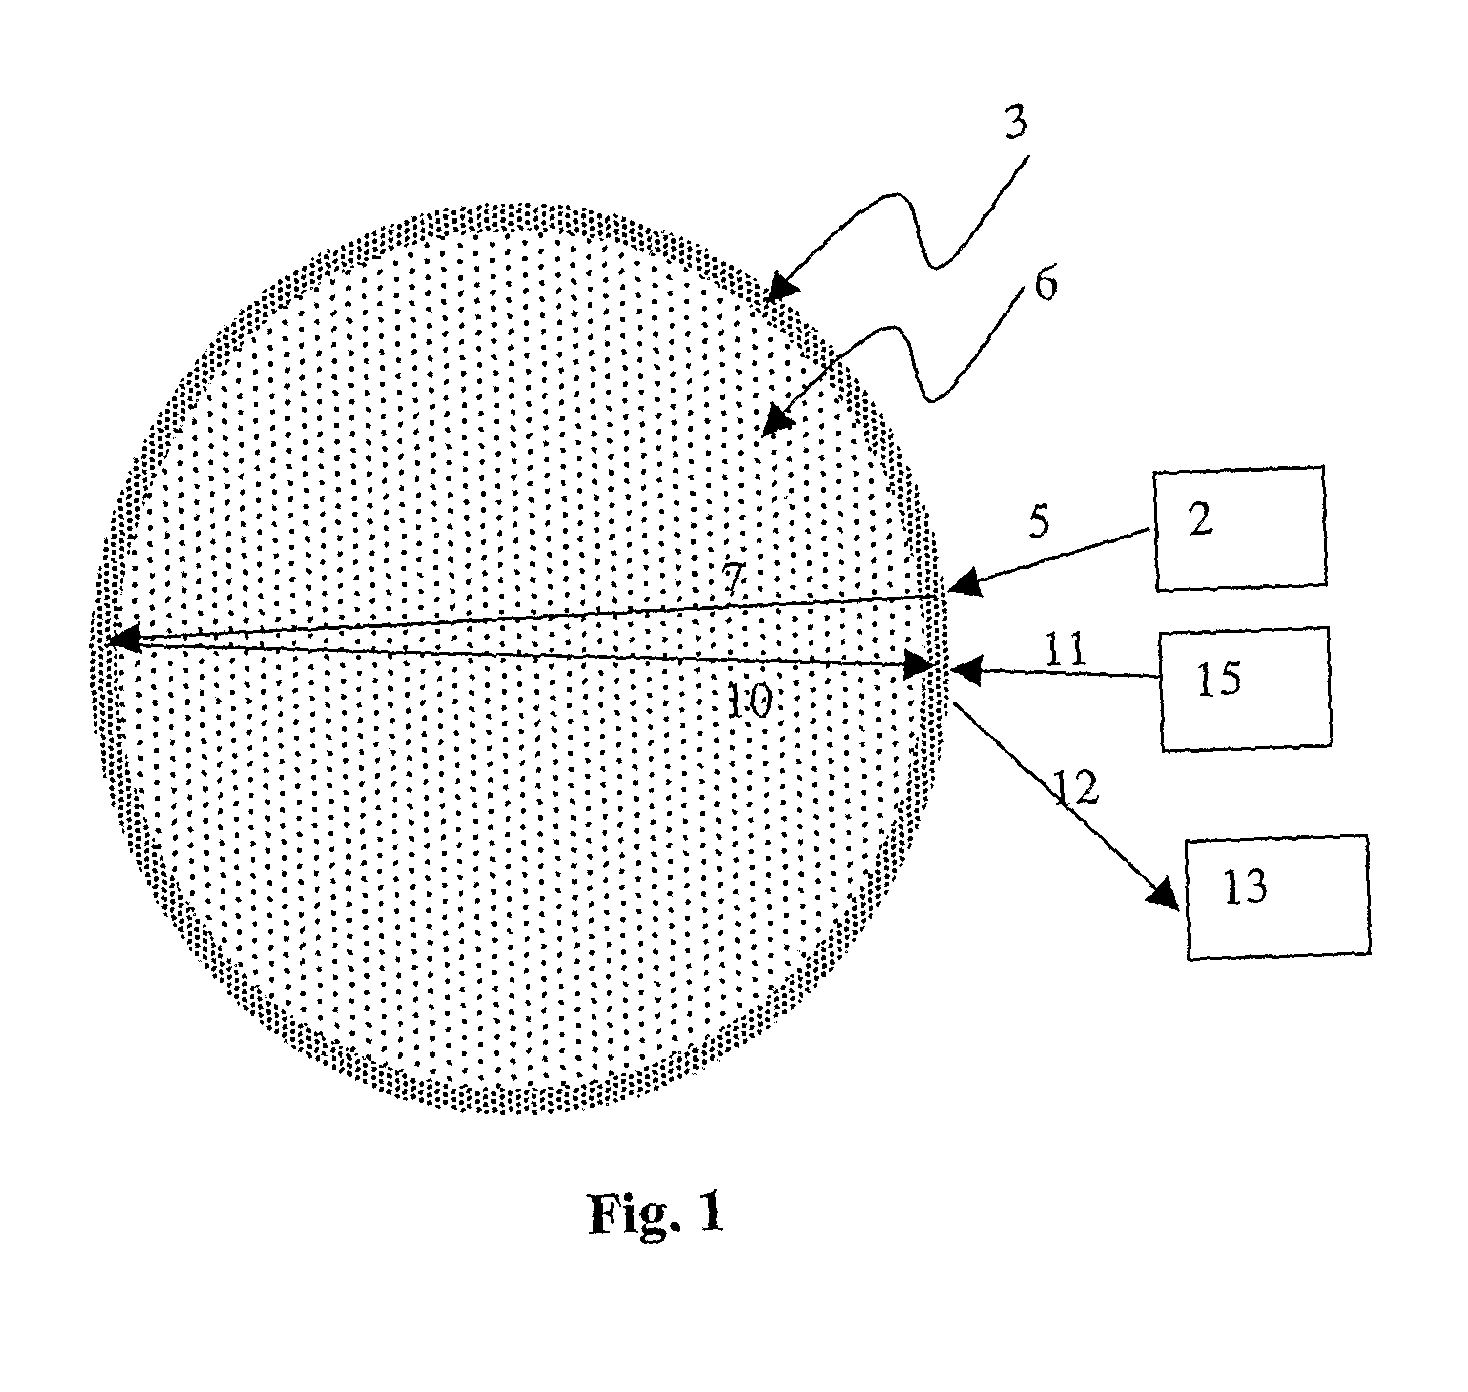 Method and Apparatus of Detecting an Object